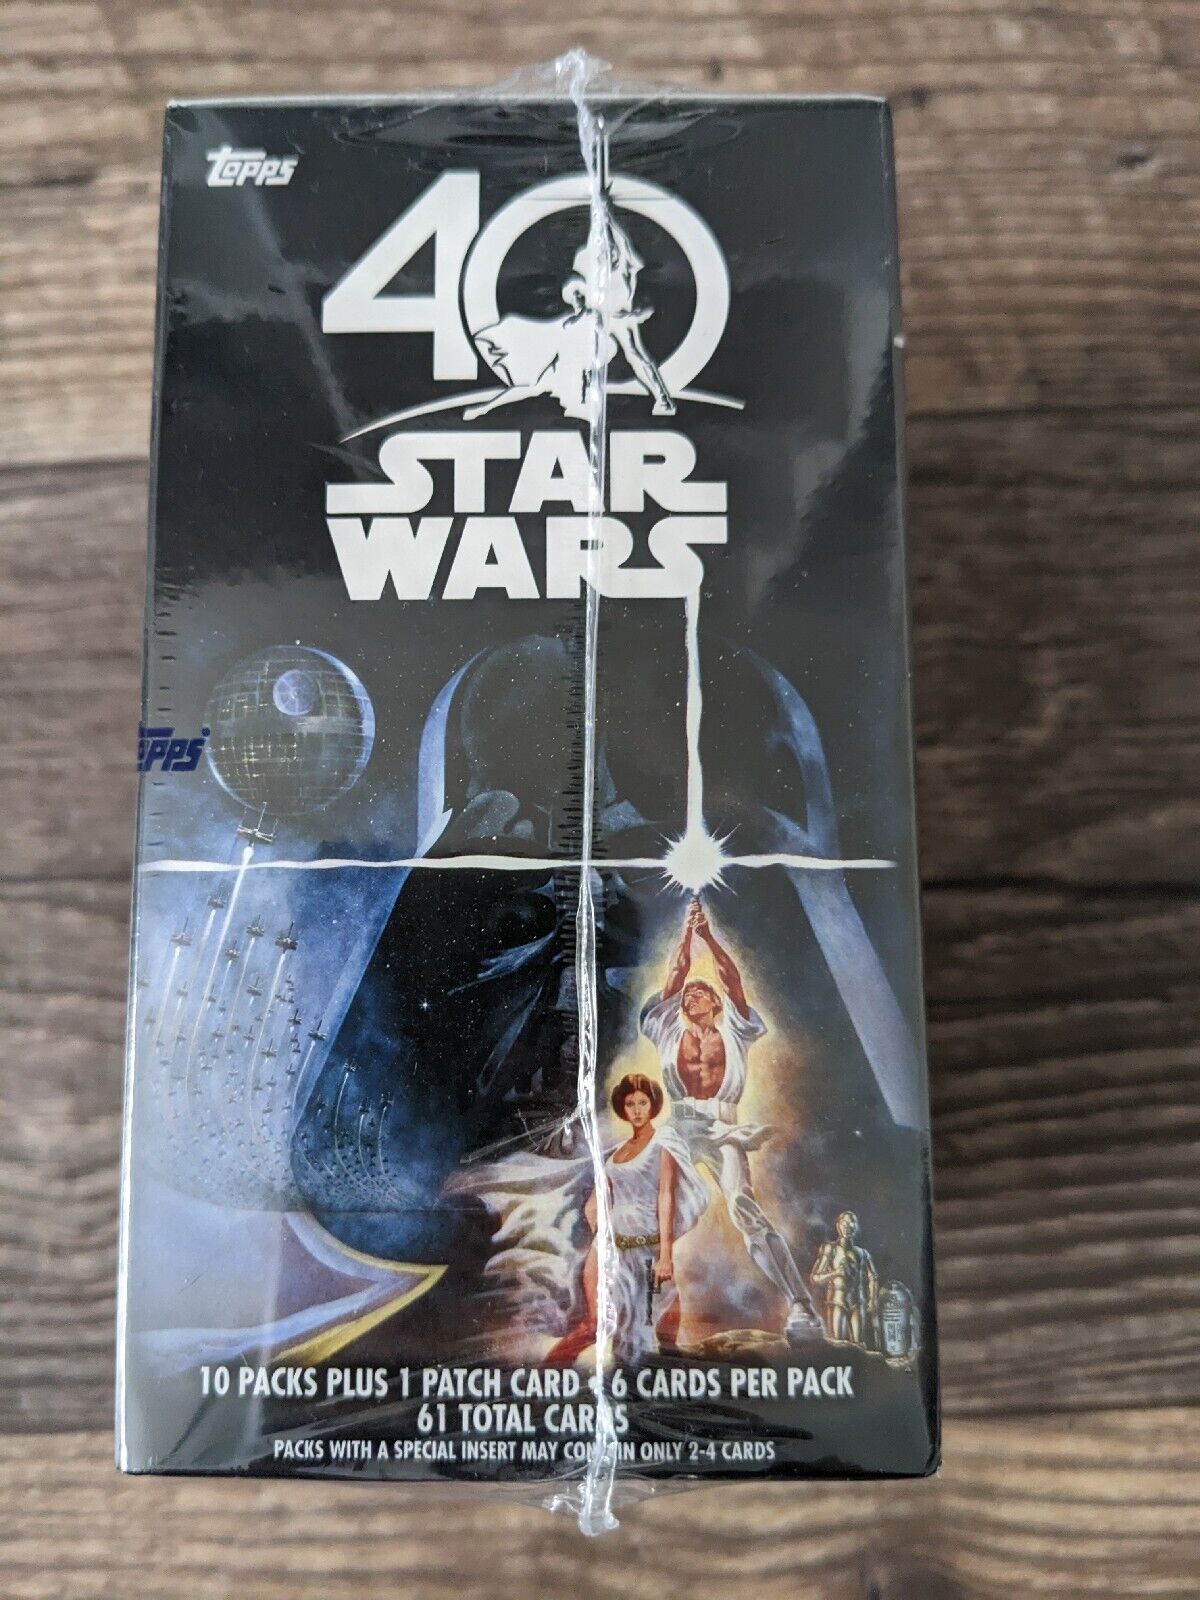 2017 Topps Star Wars 40th Anniversary Sealed Box - Collectible